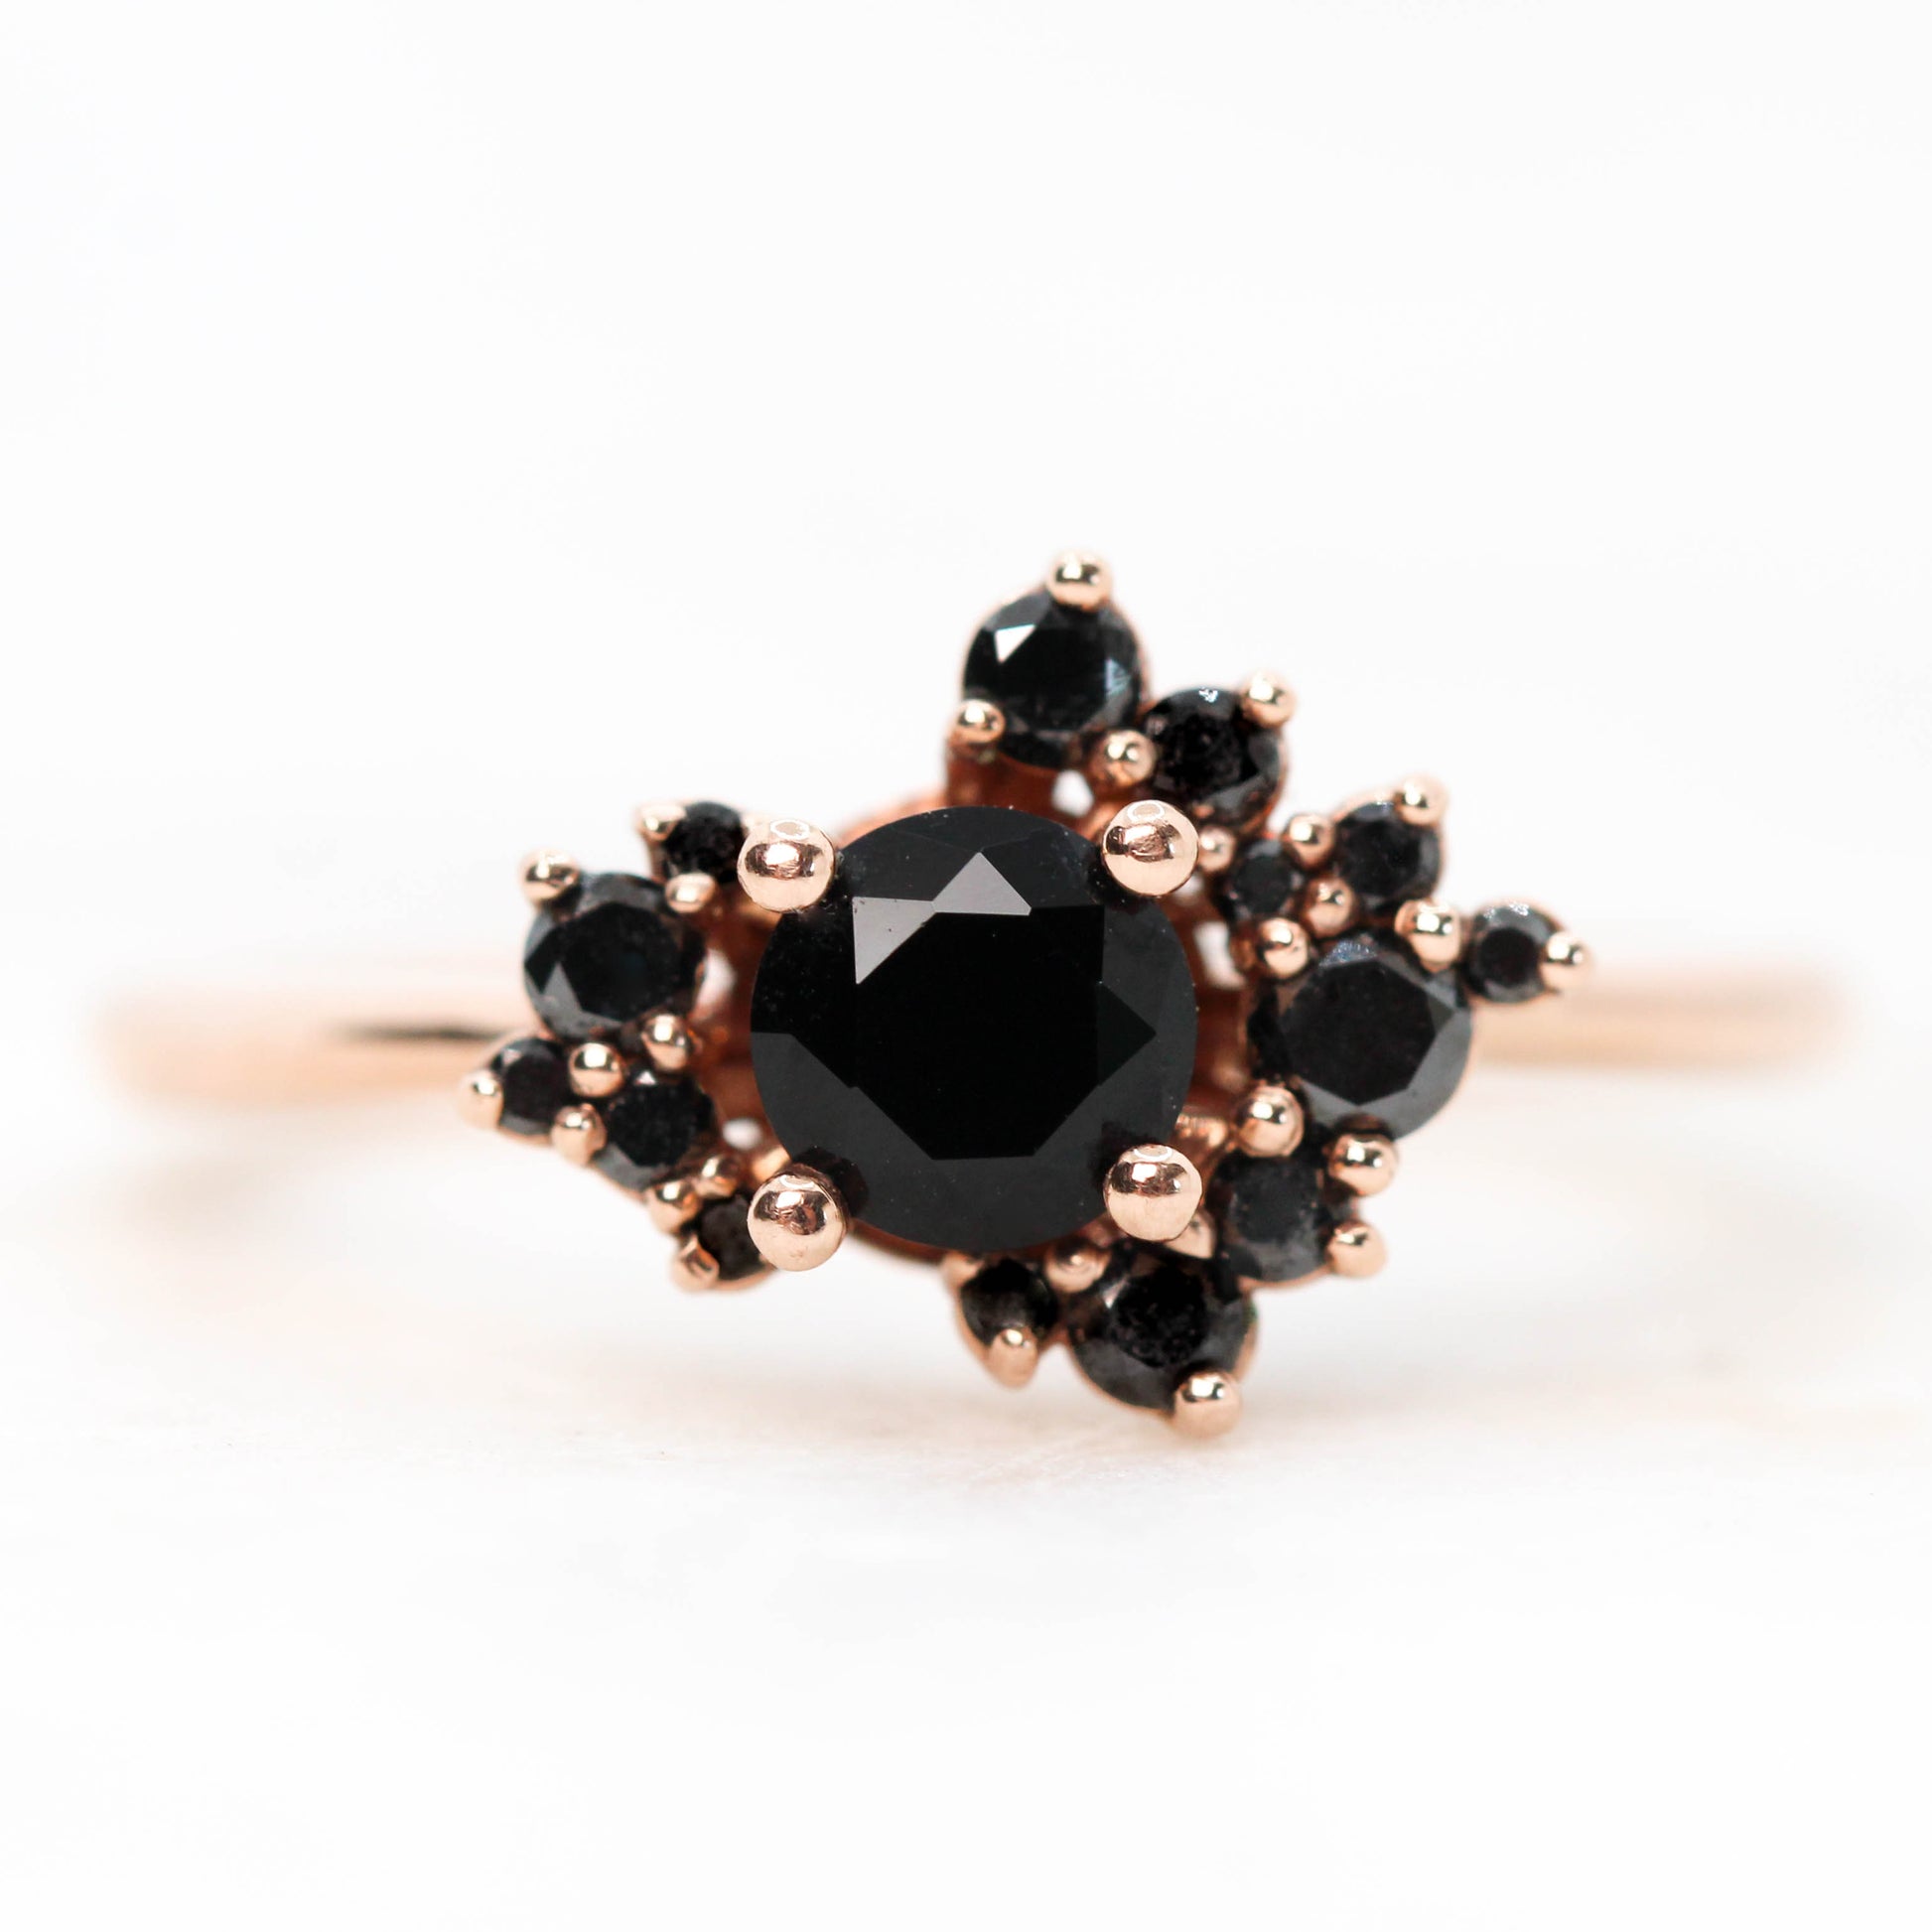 Orion Ring with All Black Diamonds - Cluster ring - Midwinter Co. Alternative Bridal Rings and Modern Fine Jewelry